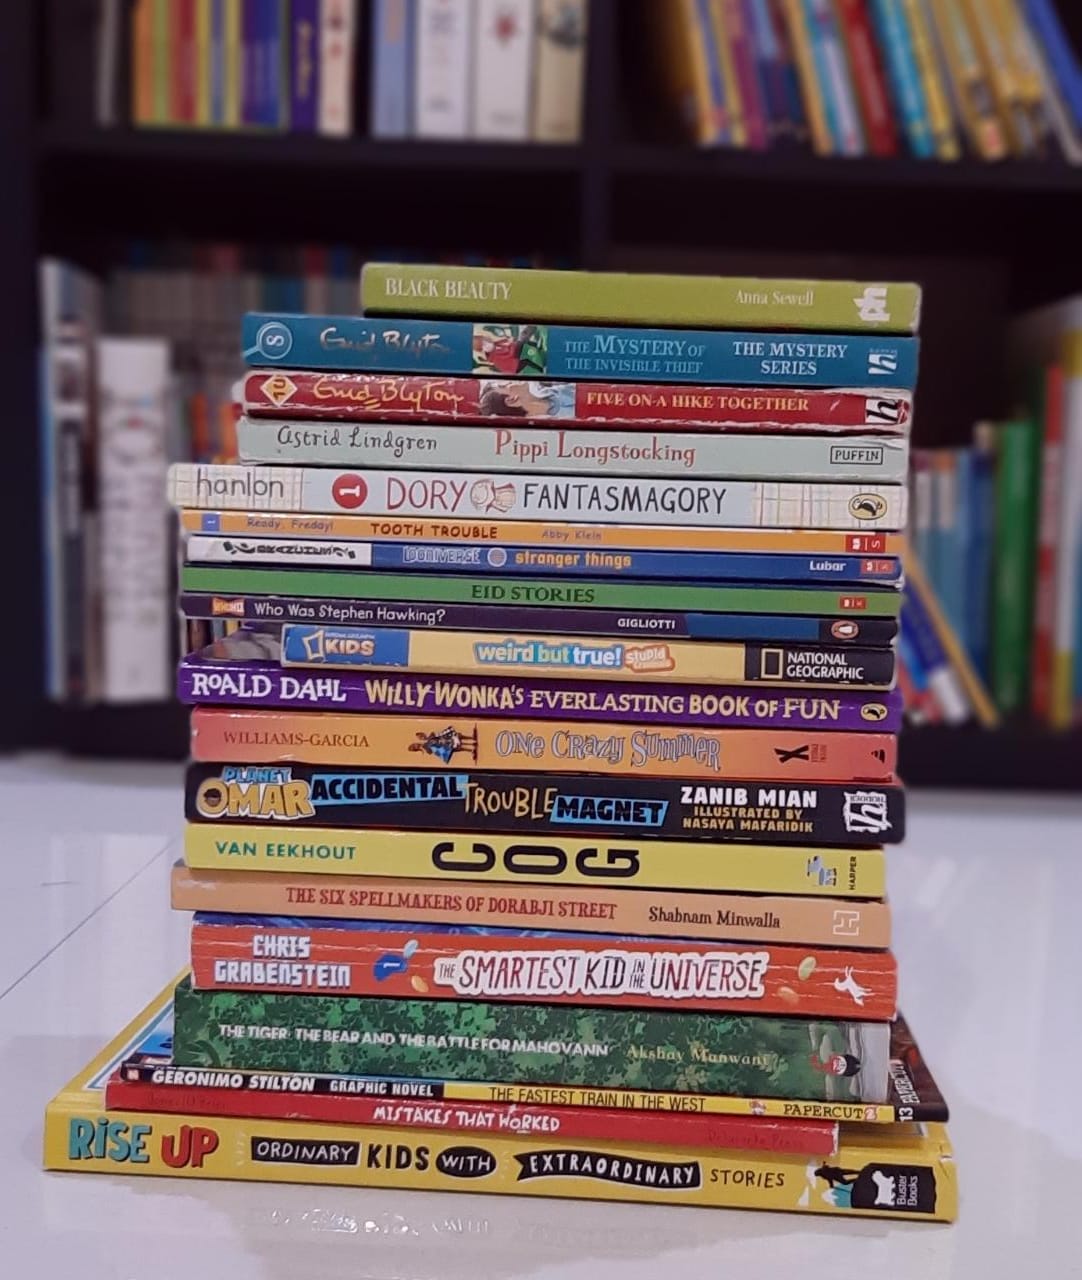 A Summer Reading List By The 8 Year Old Kid. #kbcBookBingoSr (8-12 years)